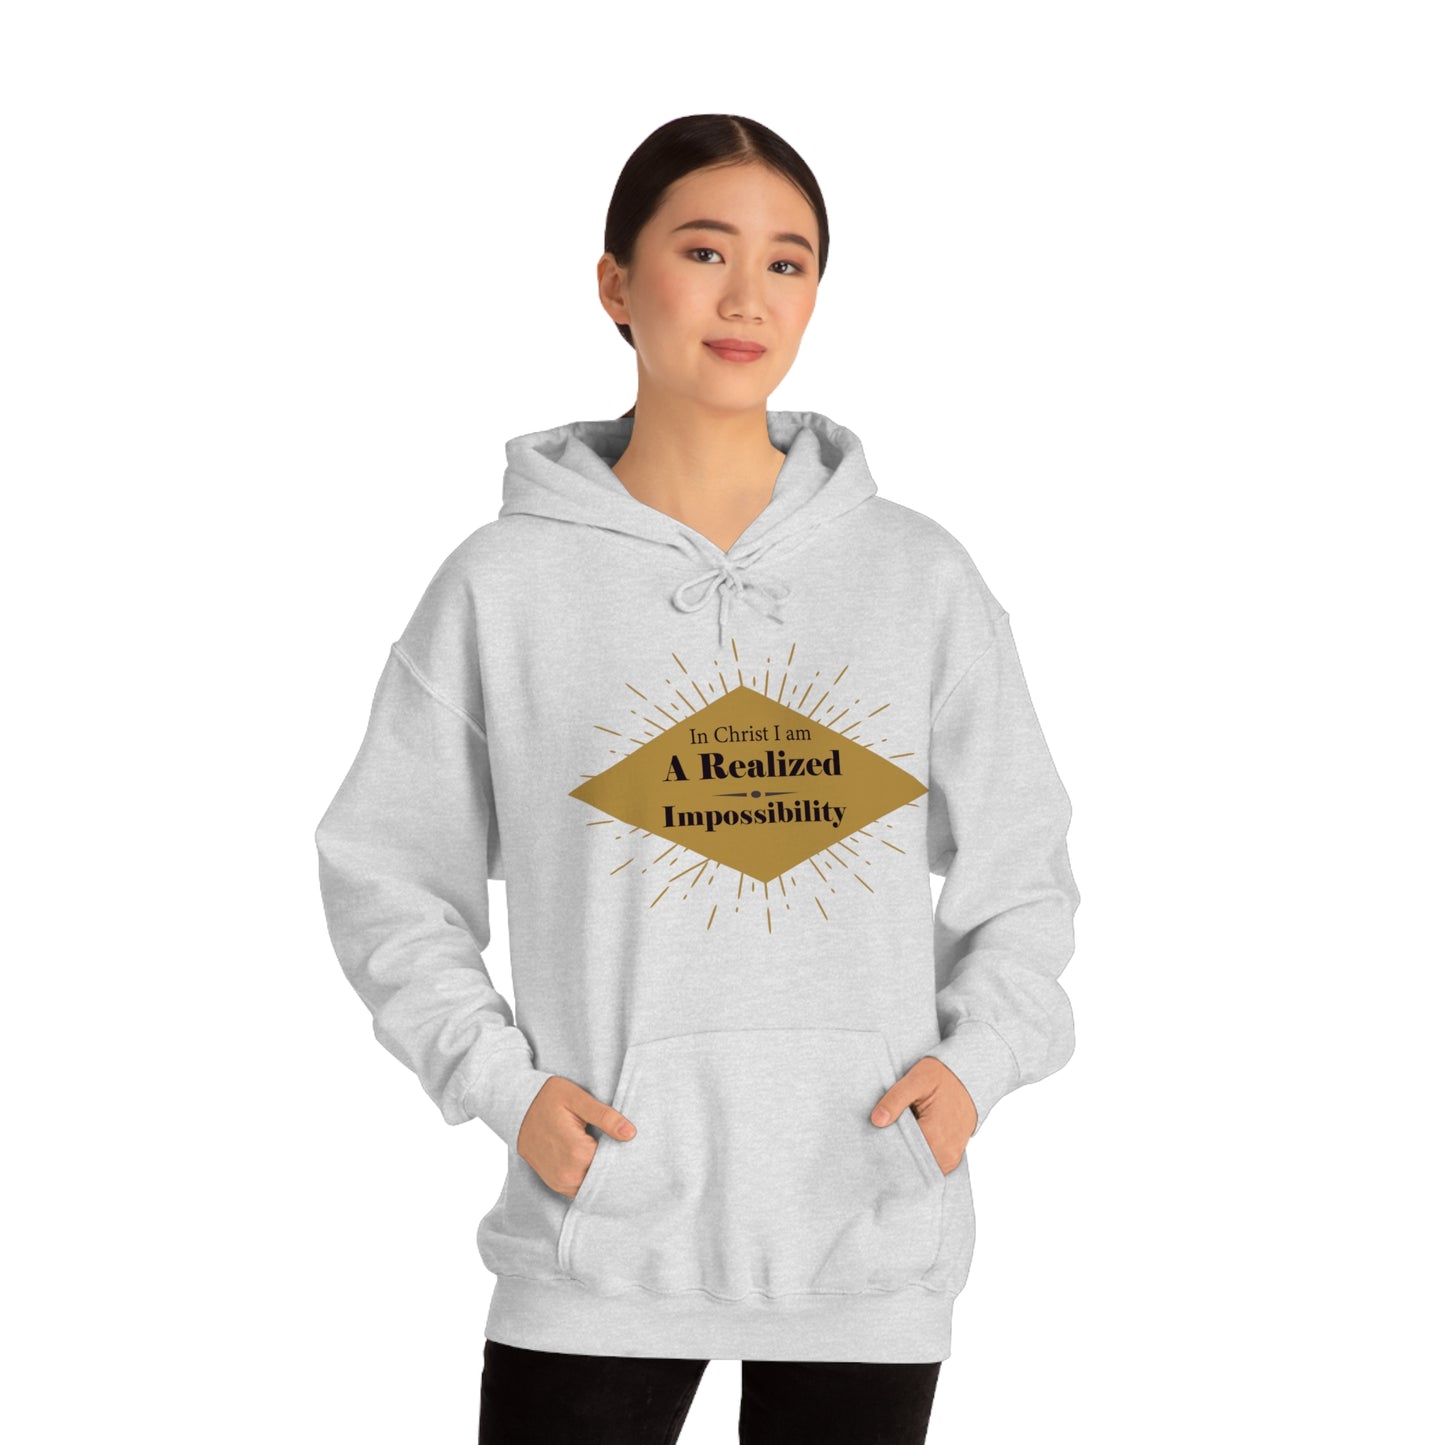 In Christ I Am A Realized Impossibility Unisex Hooded Sweatshirt